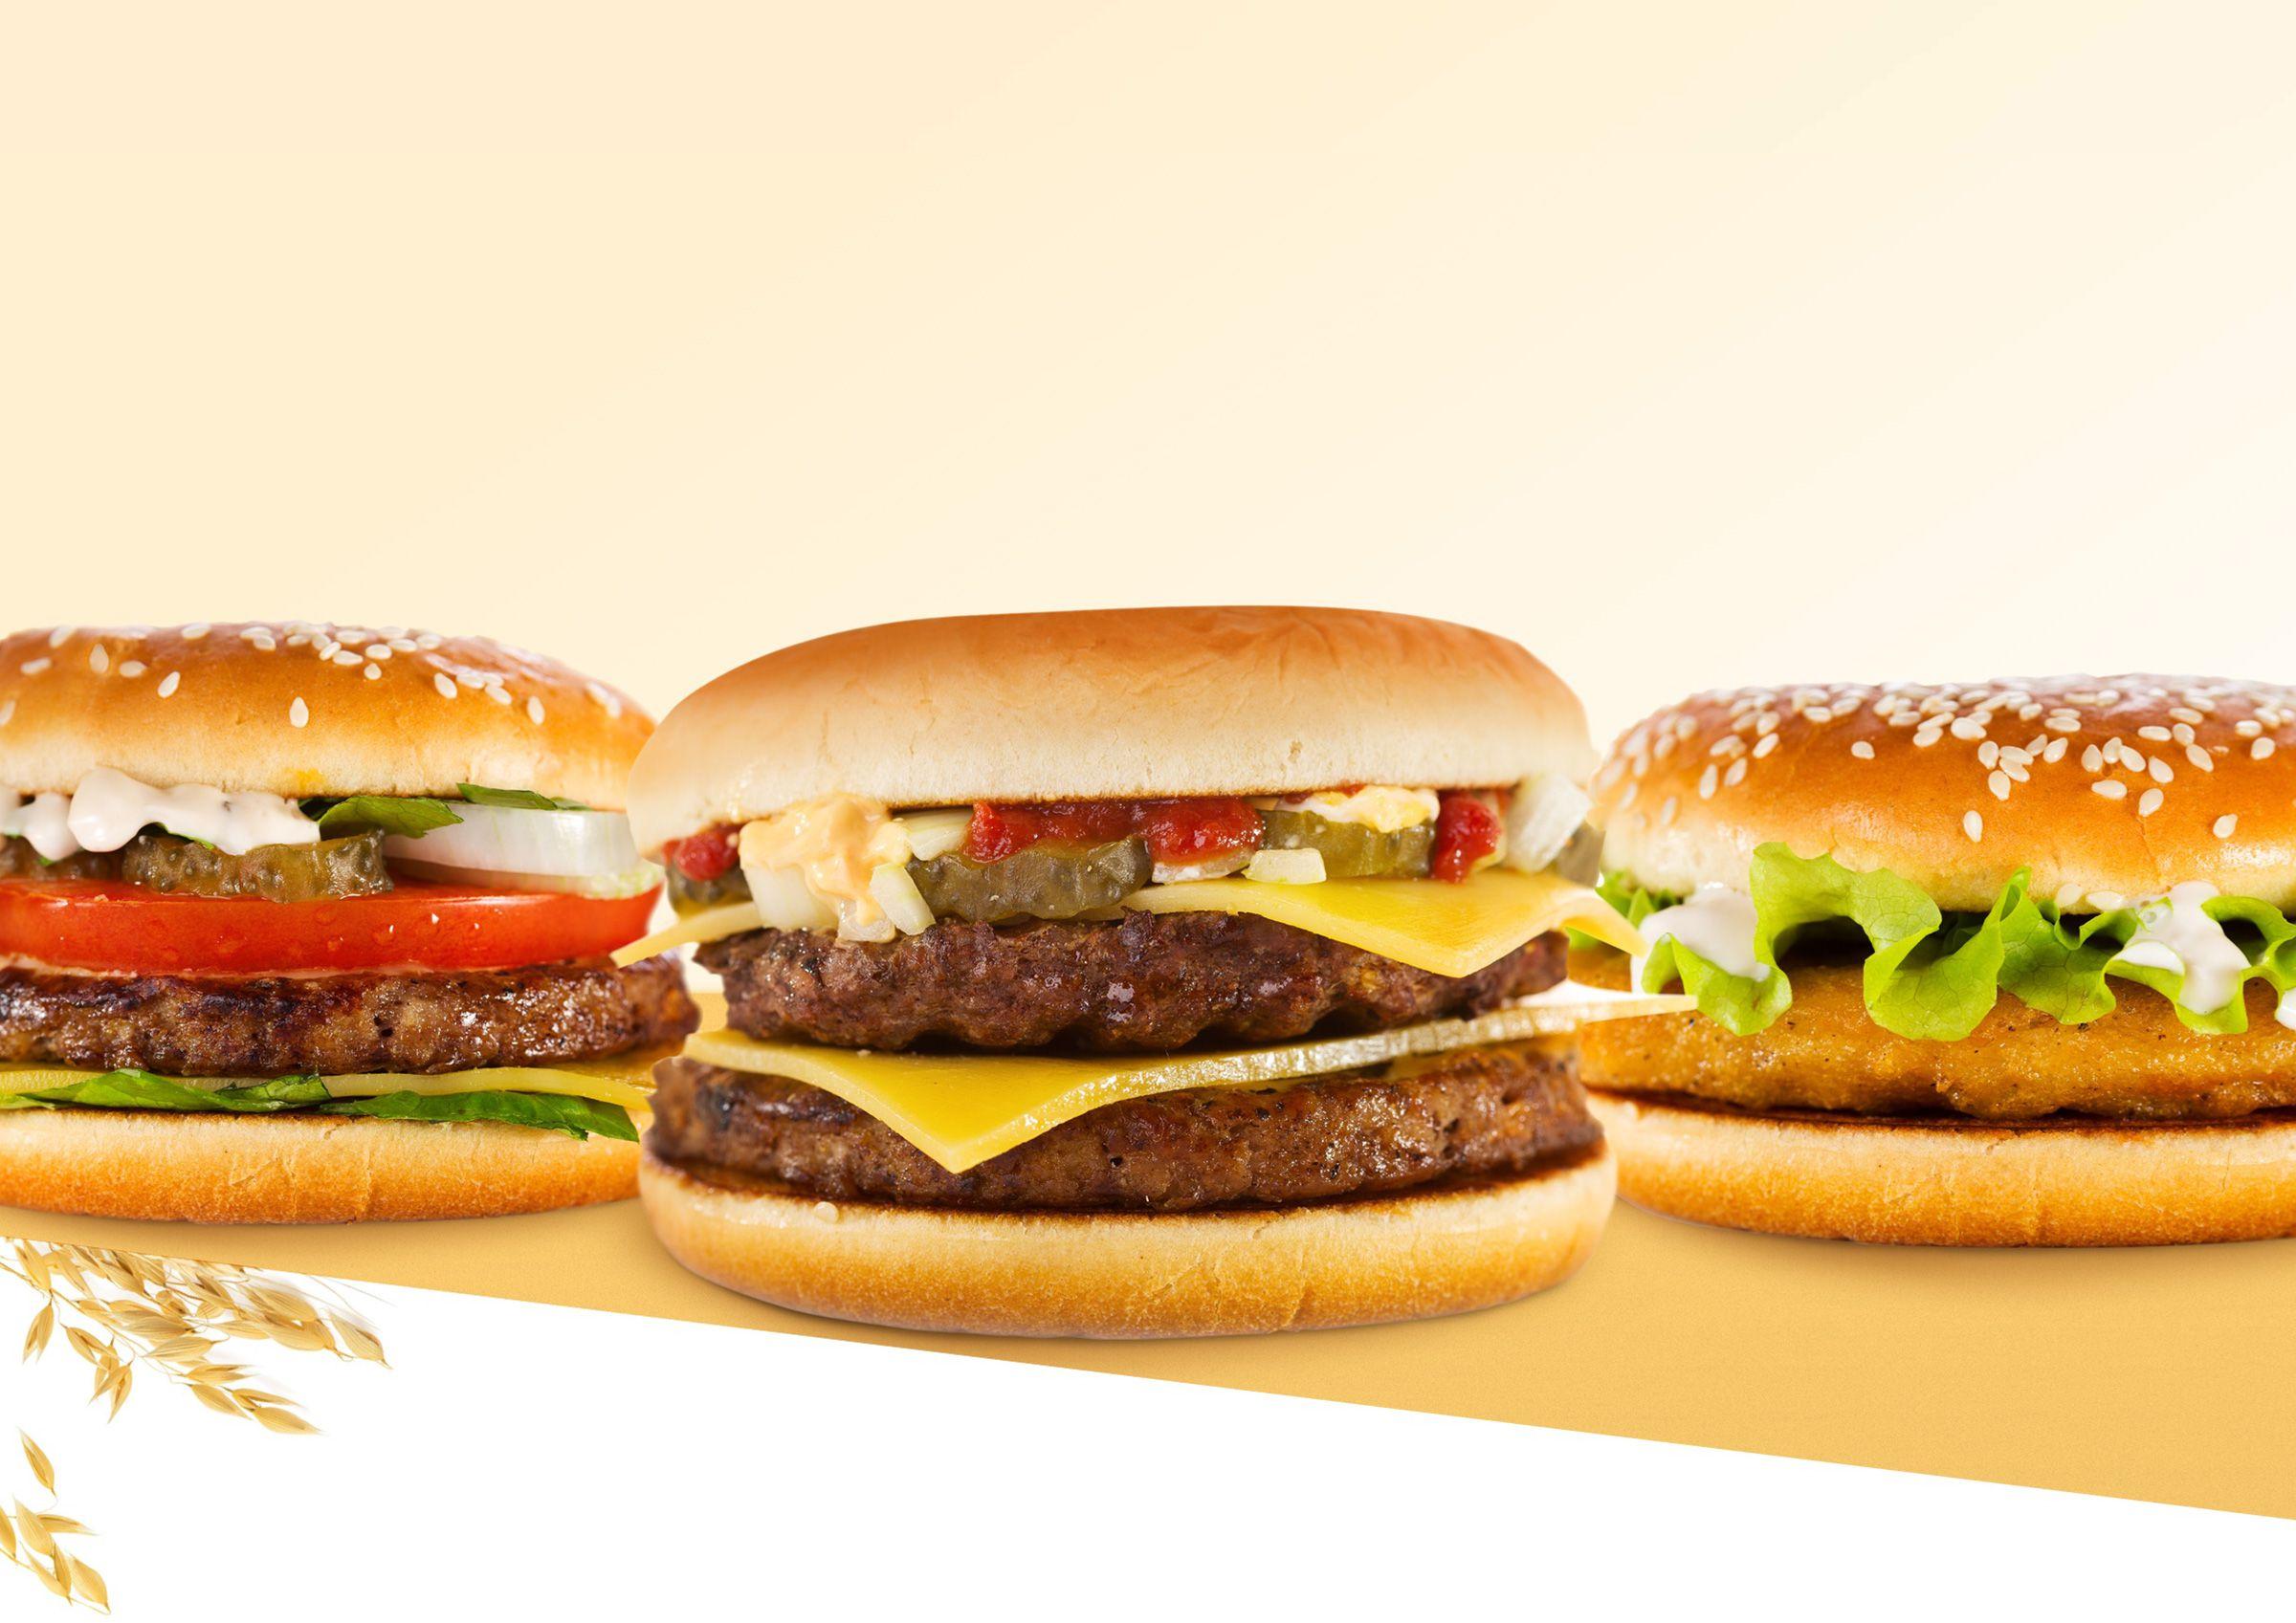 Chicken sandwich, double cheeseburger, and cheeseburger on freshly baked Northeast Foods breads.